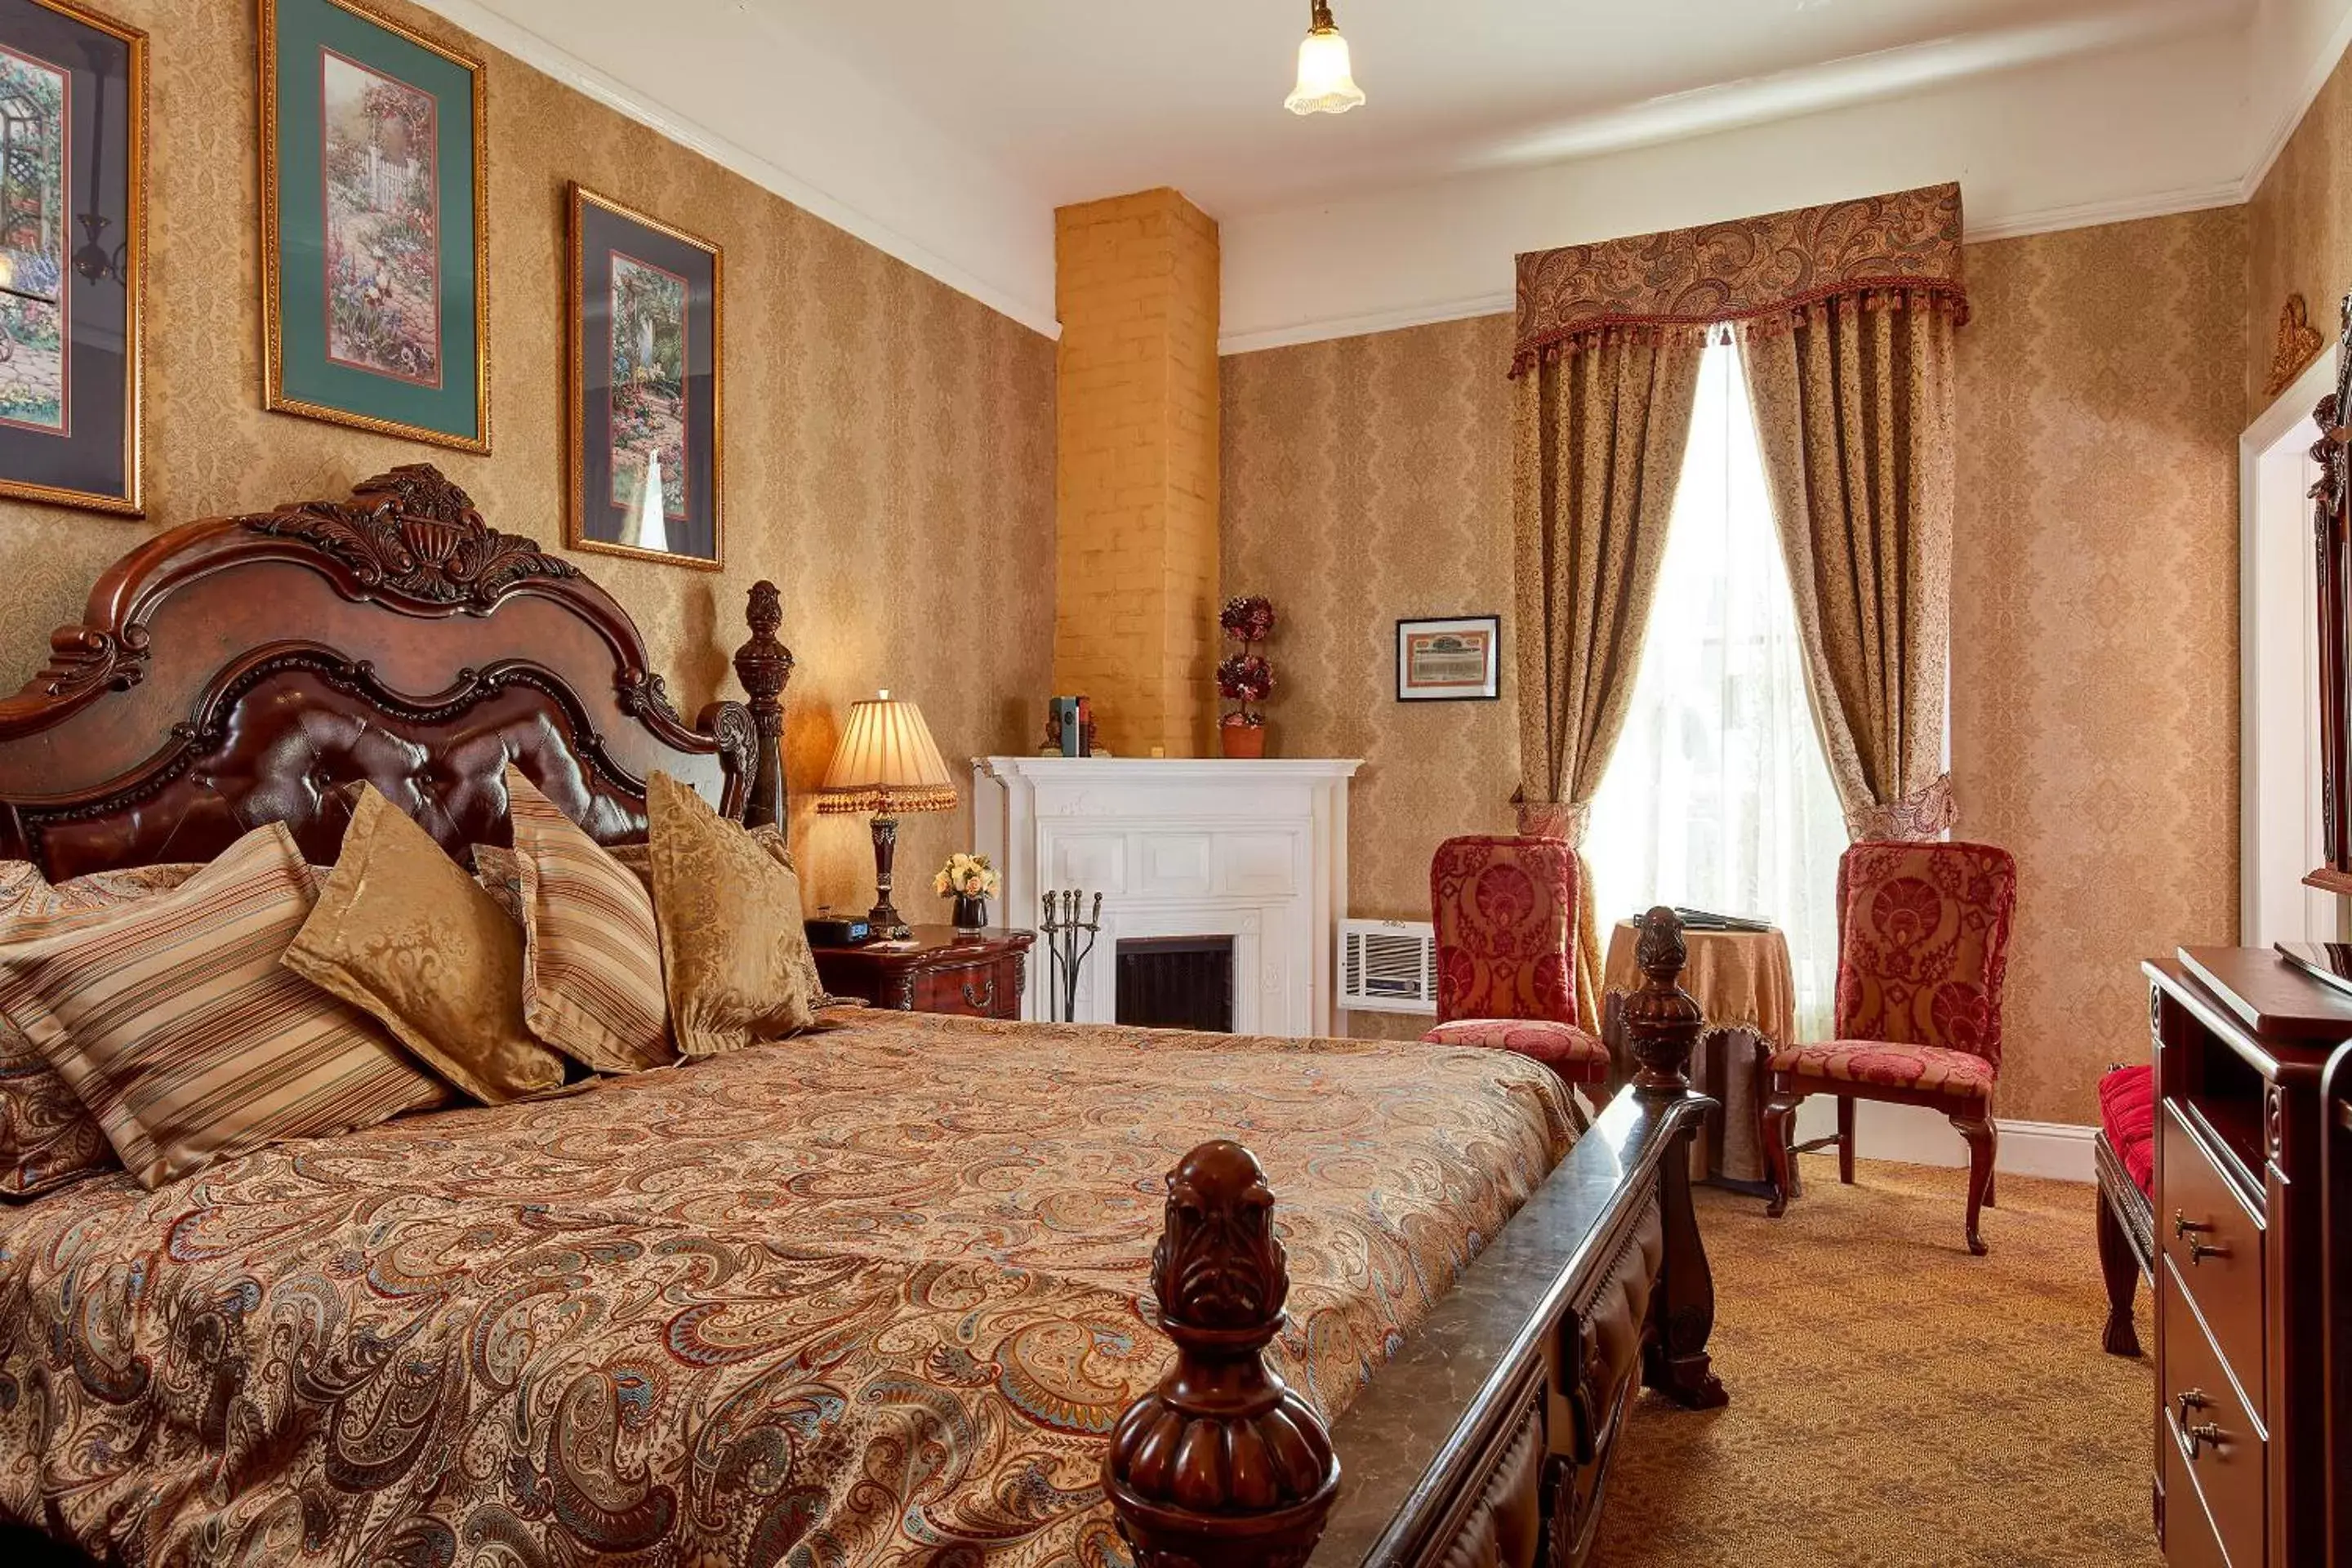 Deluxe King Room with Fireplace in Queen Anne